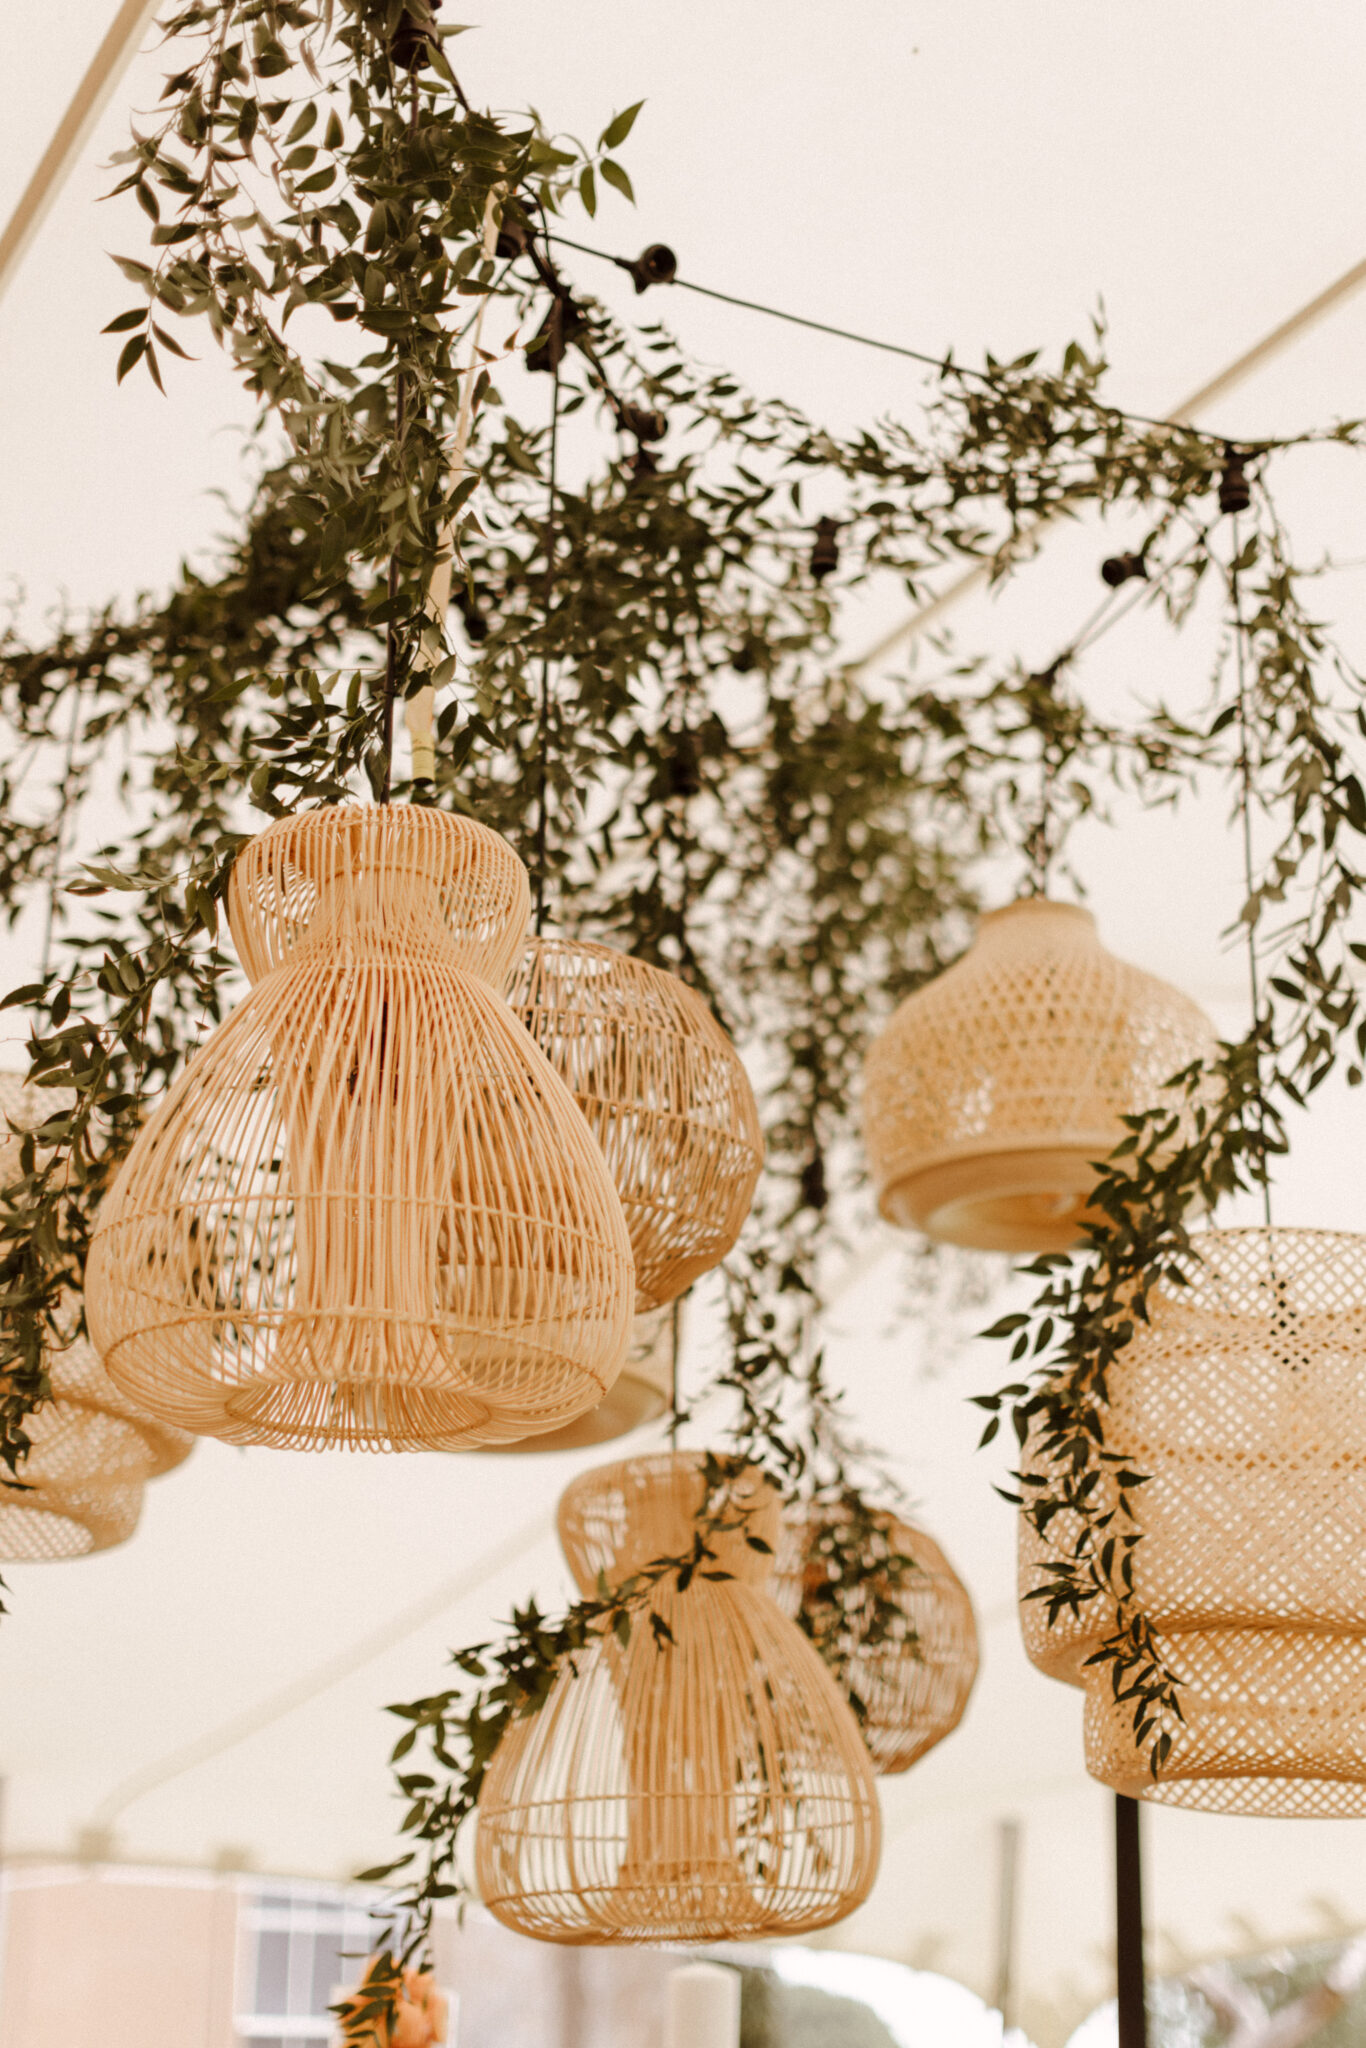 Rattan hanging lanterns with greenery entwined